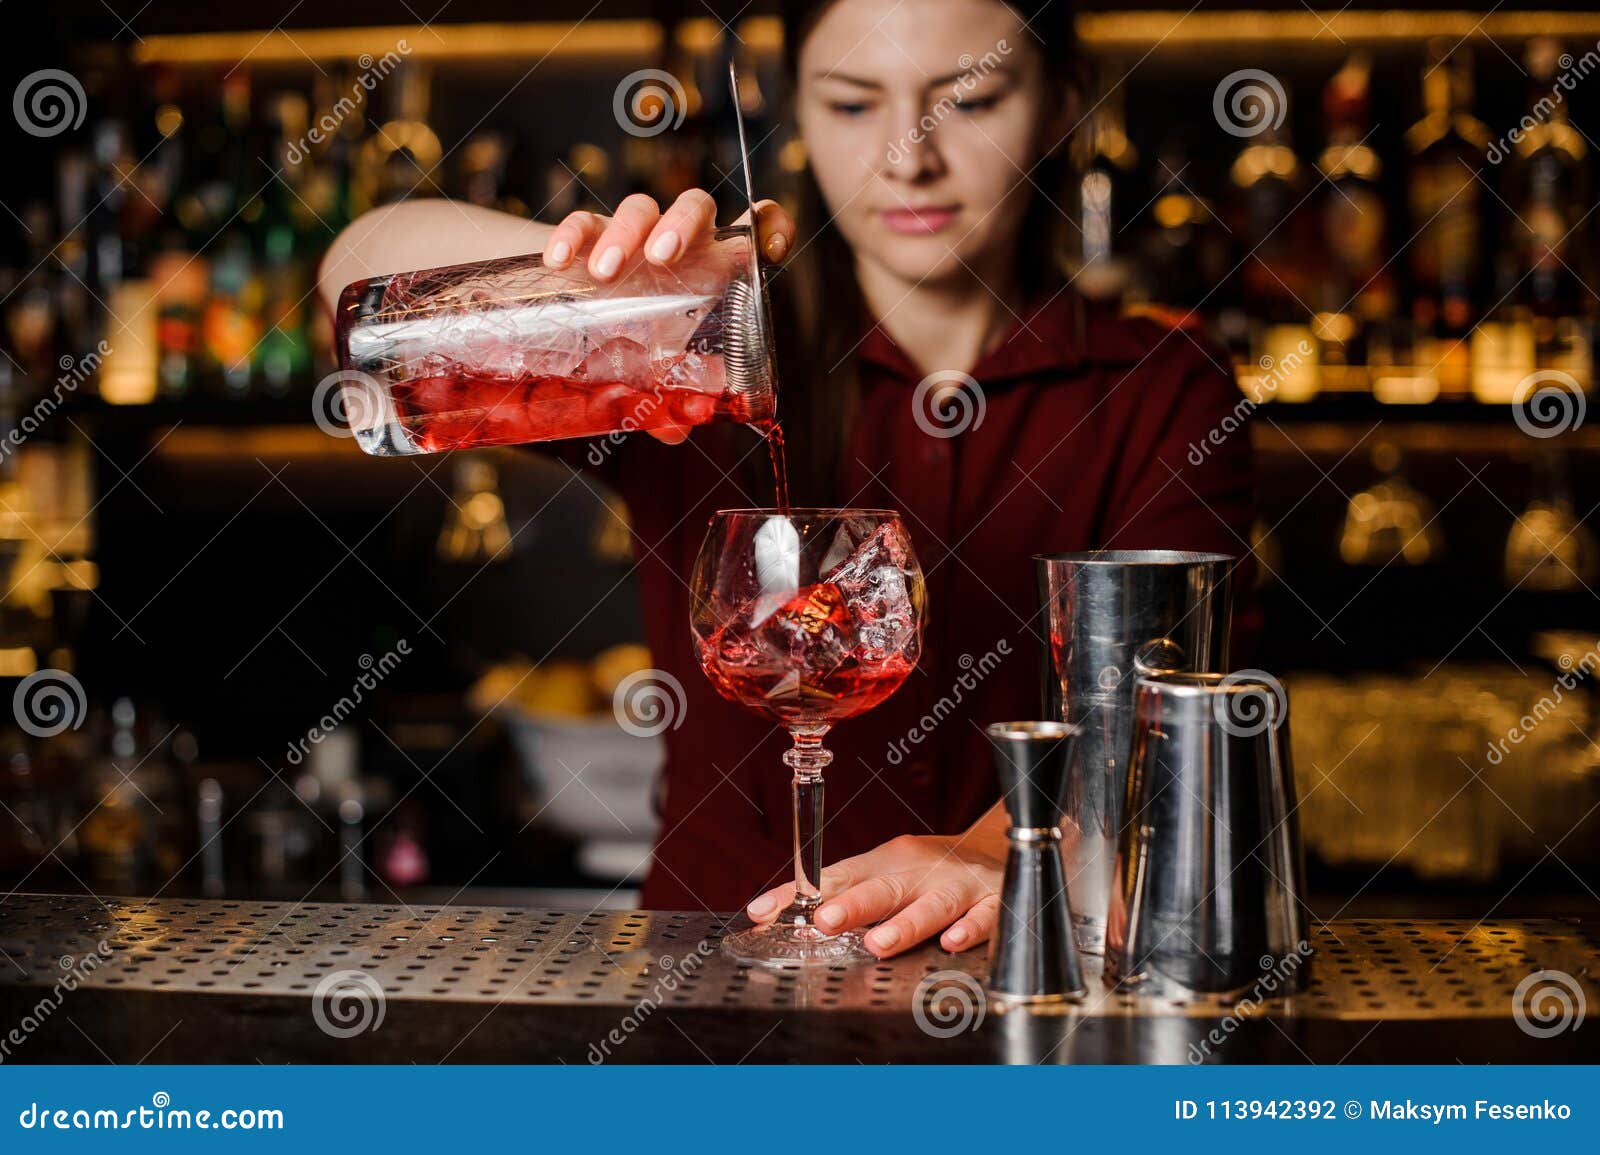 Bartender Girl Pouring a Delicious Light Red Cocktail Stock Photo ...